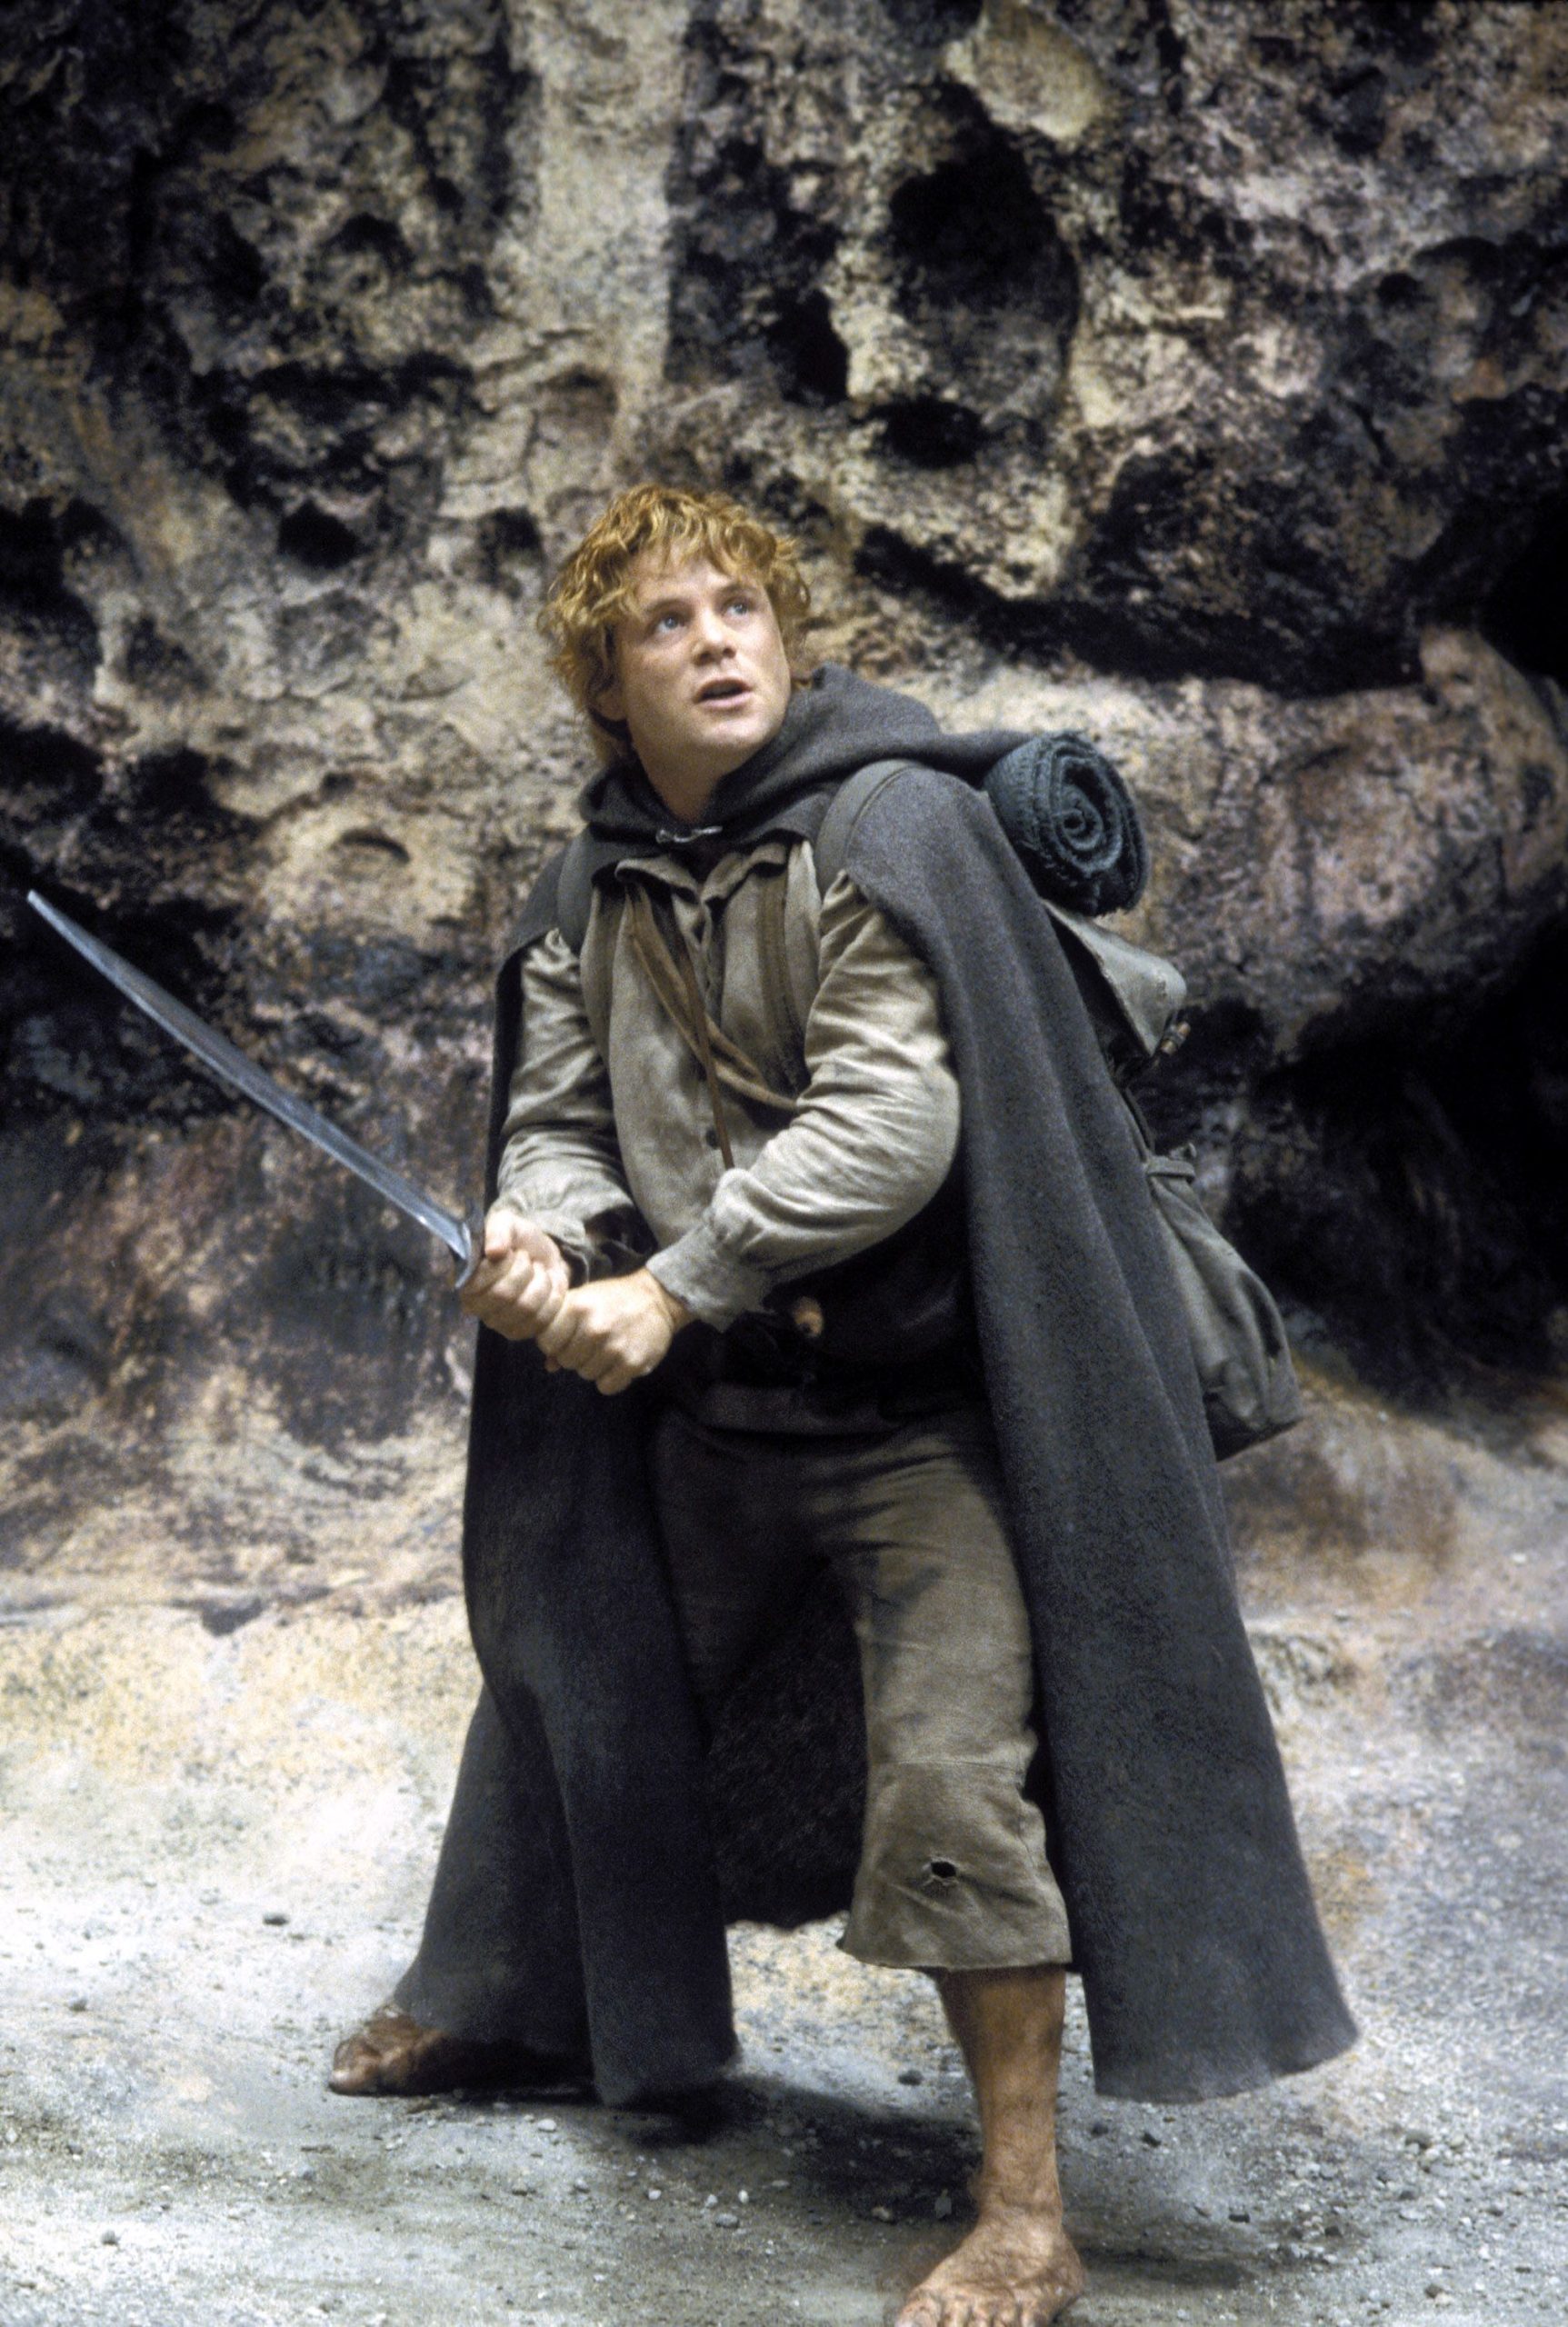 Samwise Gamgee (Sean Astin) wields a sword to defend himself and Frodo amidst a rocky slope.